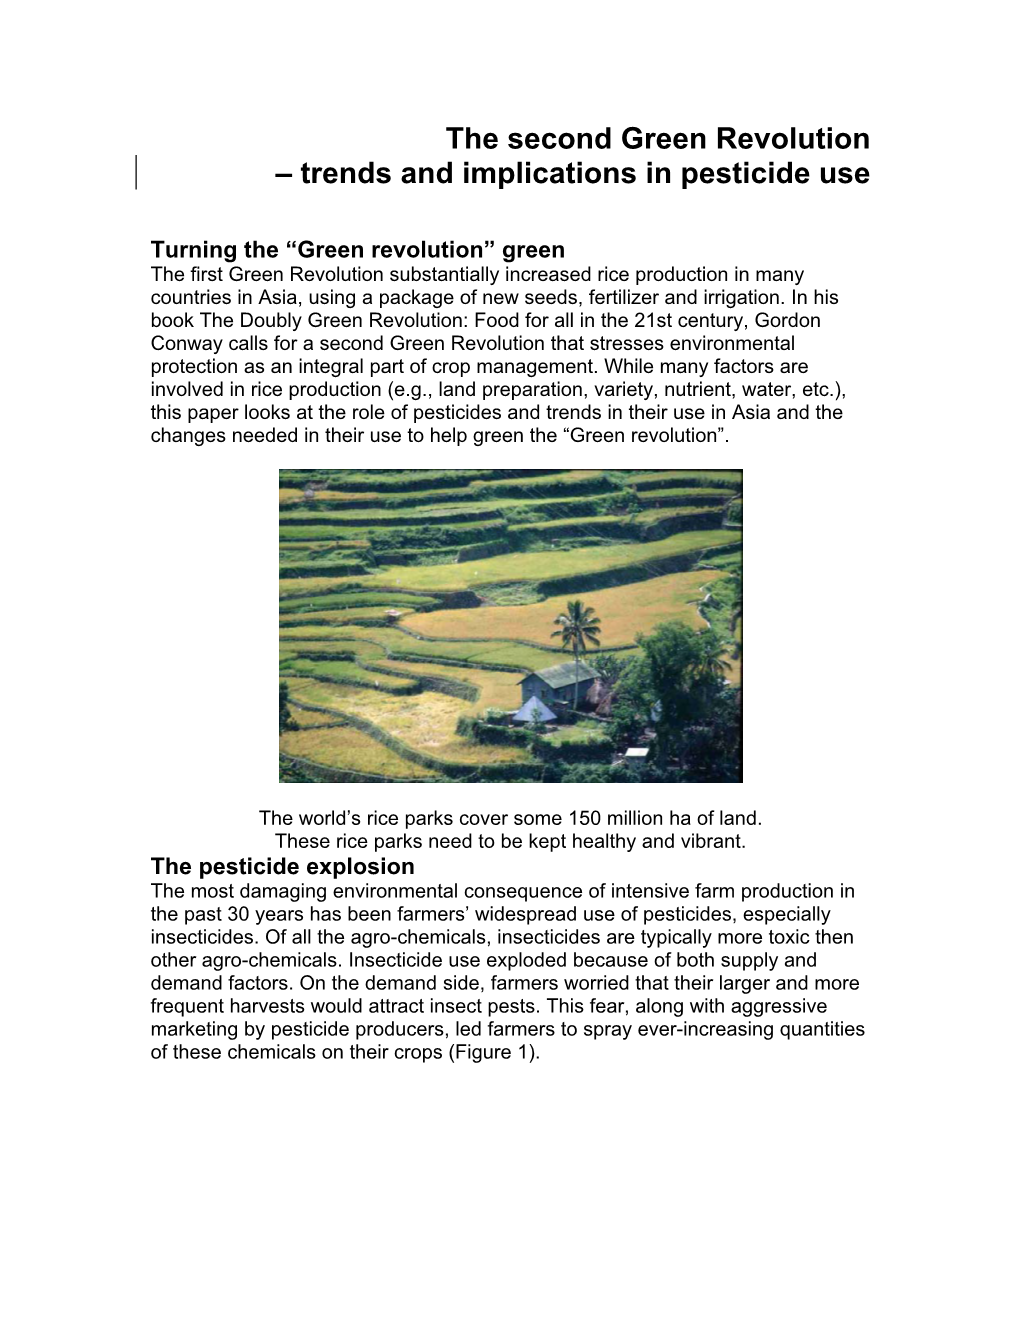 The Second Green Revolution – Trends and Implications in Pesticide Use